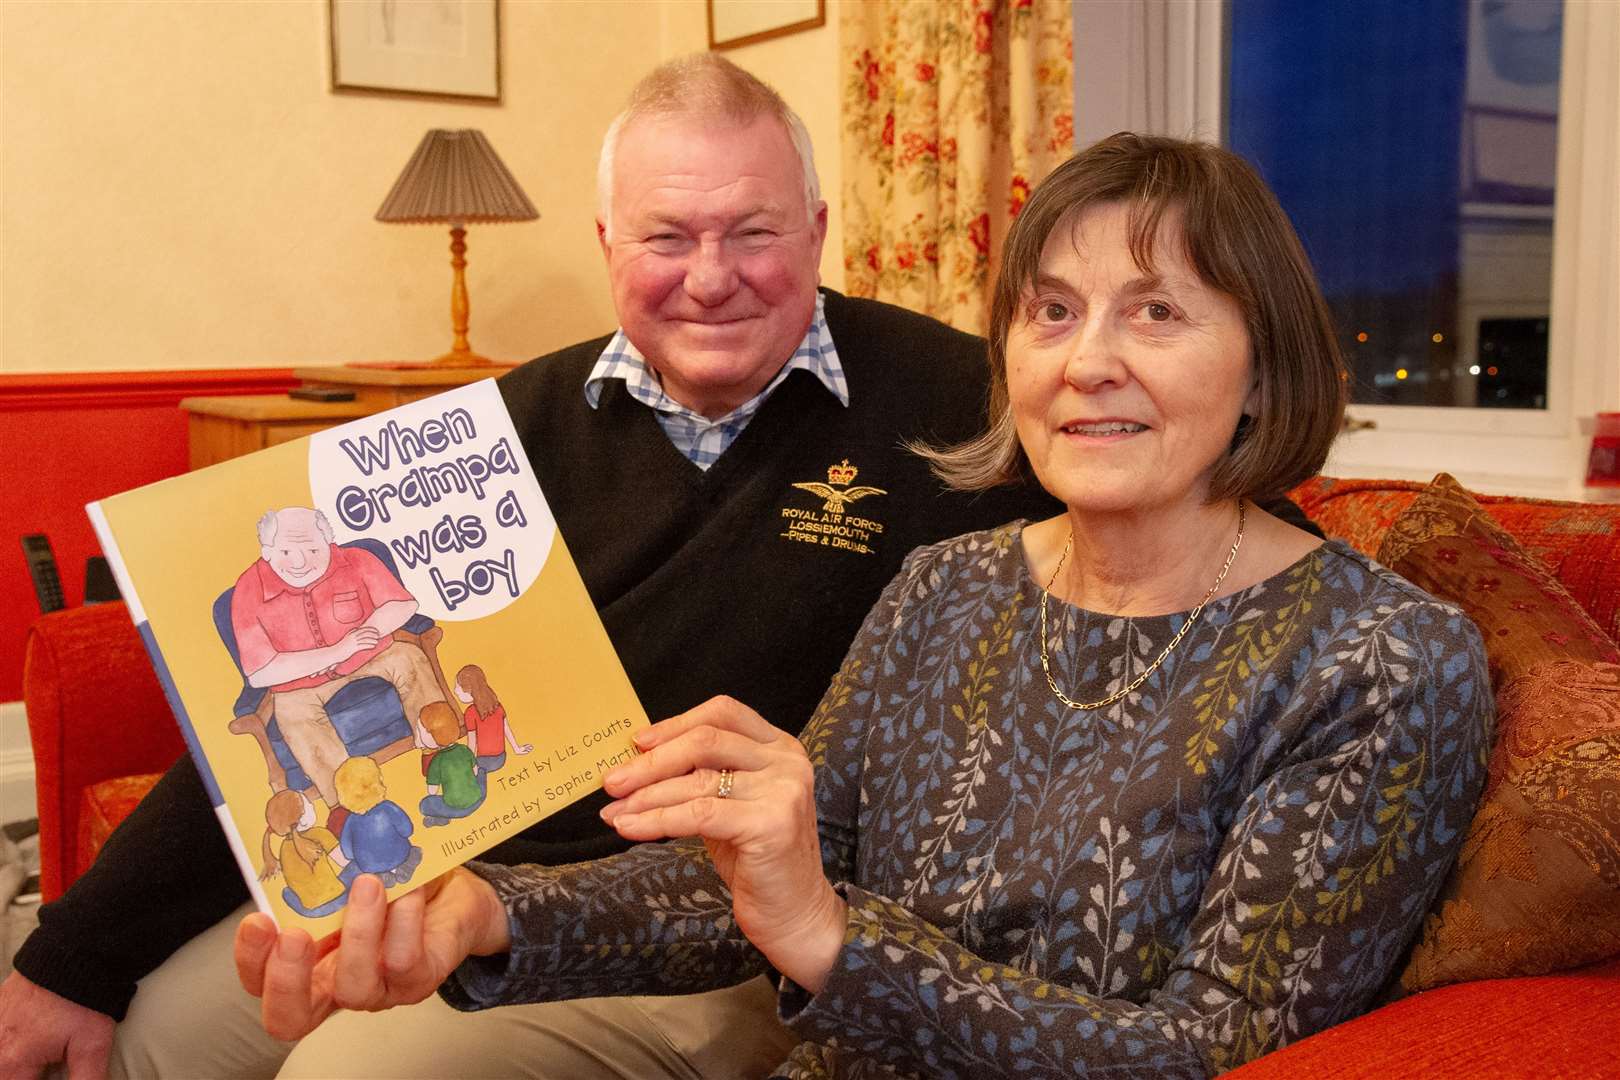 Retired surgeon Alastair Coutts, who is the subject of a new charity book entitled When Granpa was a Boy, written by his wife Liz as a special 70th birthday present. Picture: Daniel Forsyth.